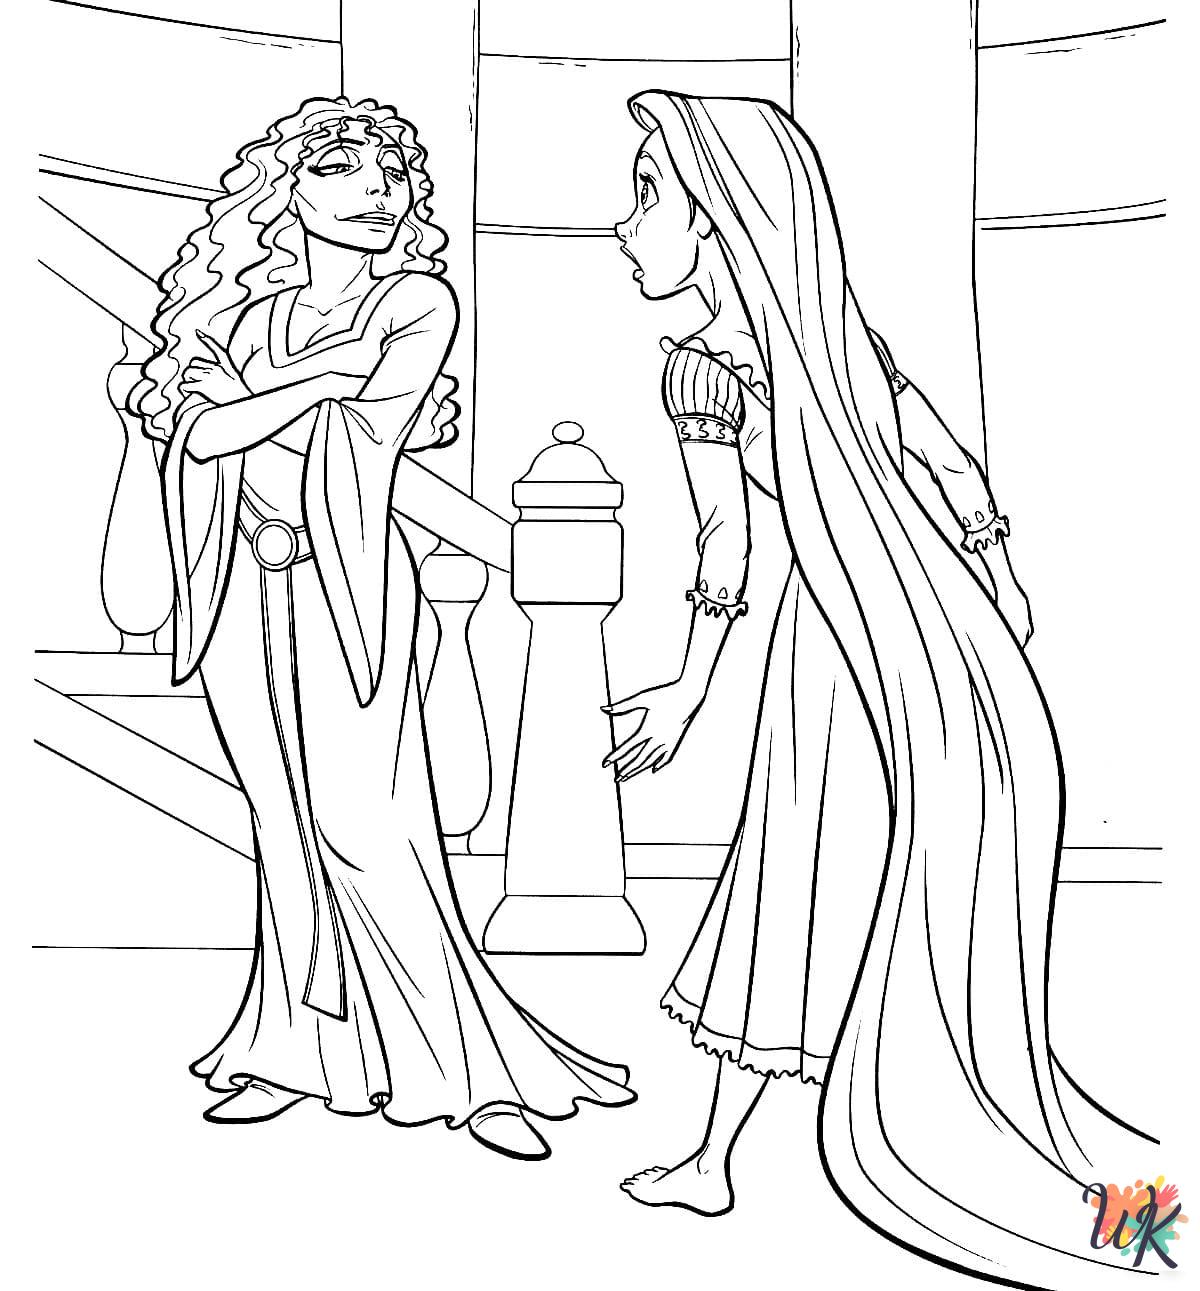 Tangled ornament coloring pages